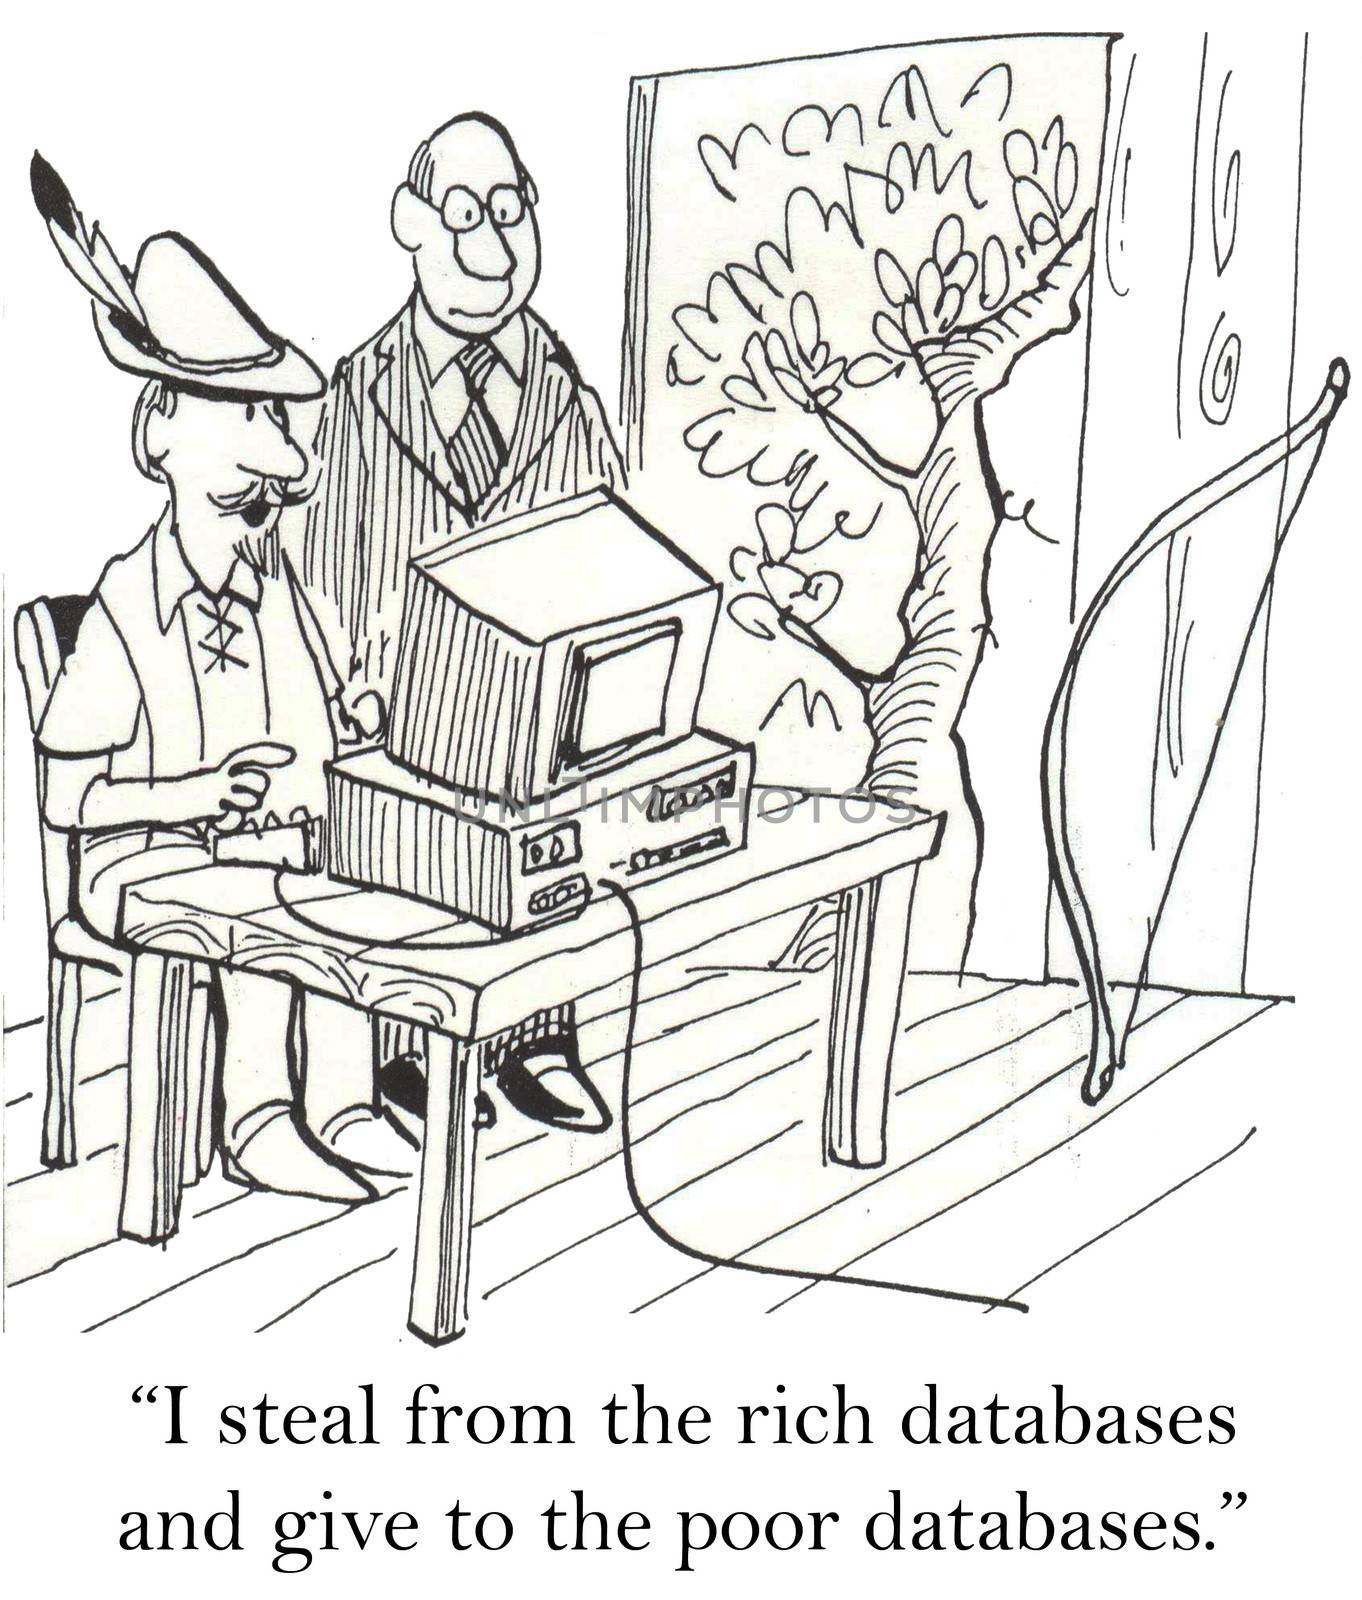 "I steal from the rich databases and give to the poor databases."